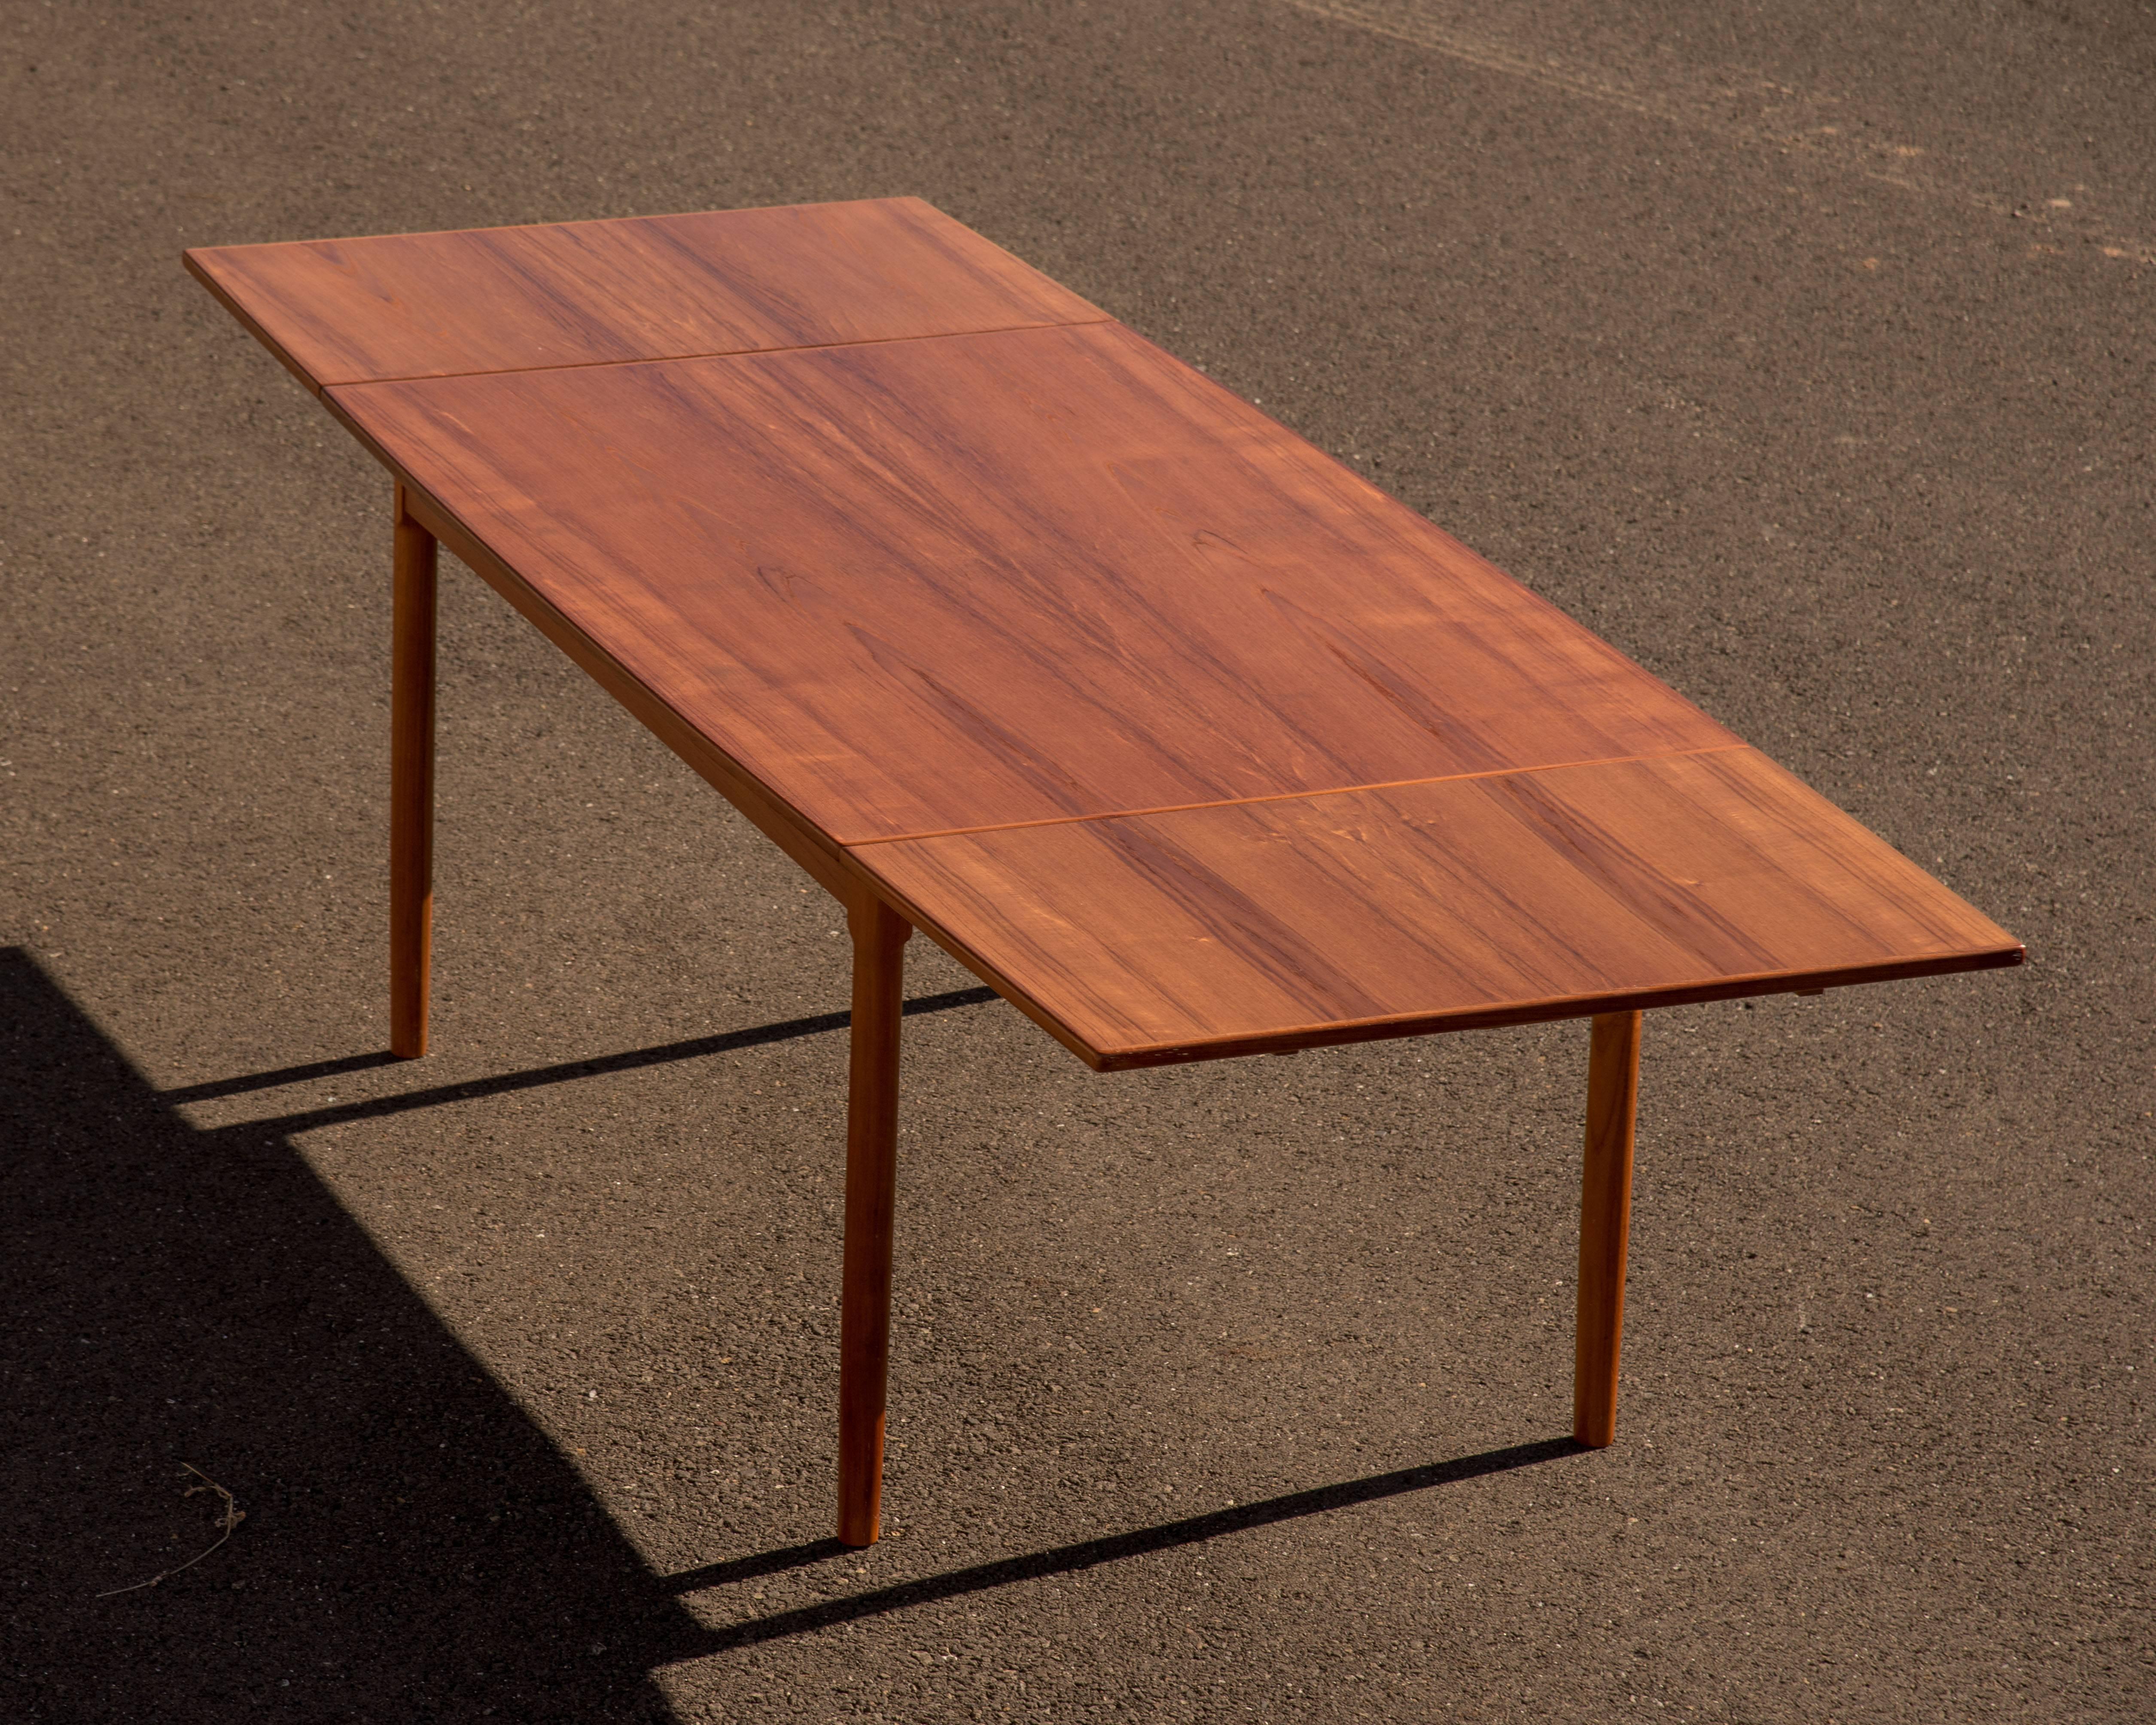 Stunning Danish designed teak dining table with two sleek slide out leaves on each side to allow for comfortable seating for up to 10. In it's closed position the table comfortably accommodates six. There's an elegant slight taper to the surface